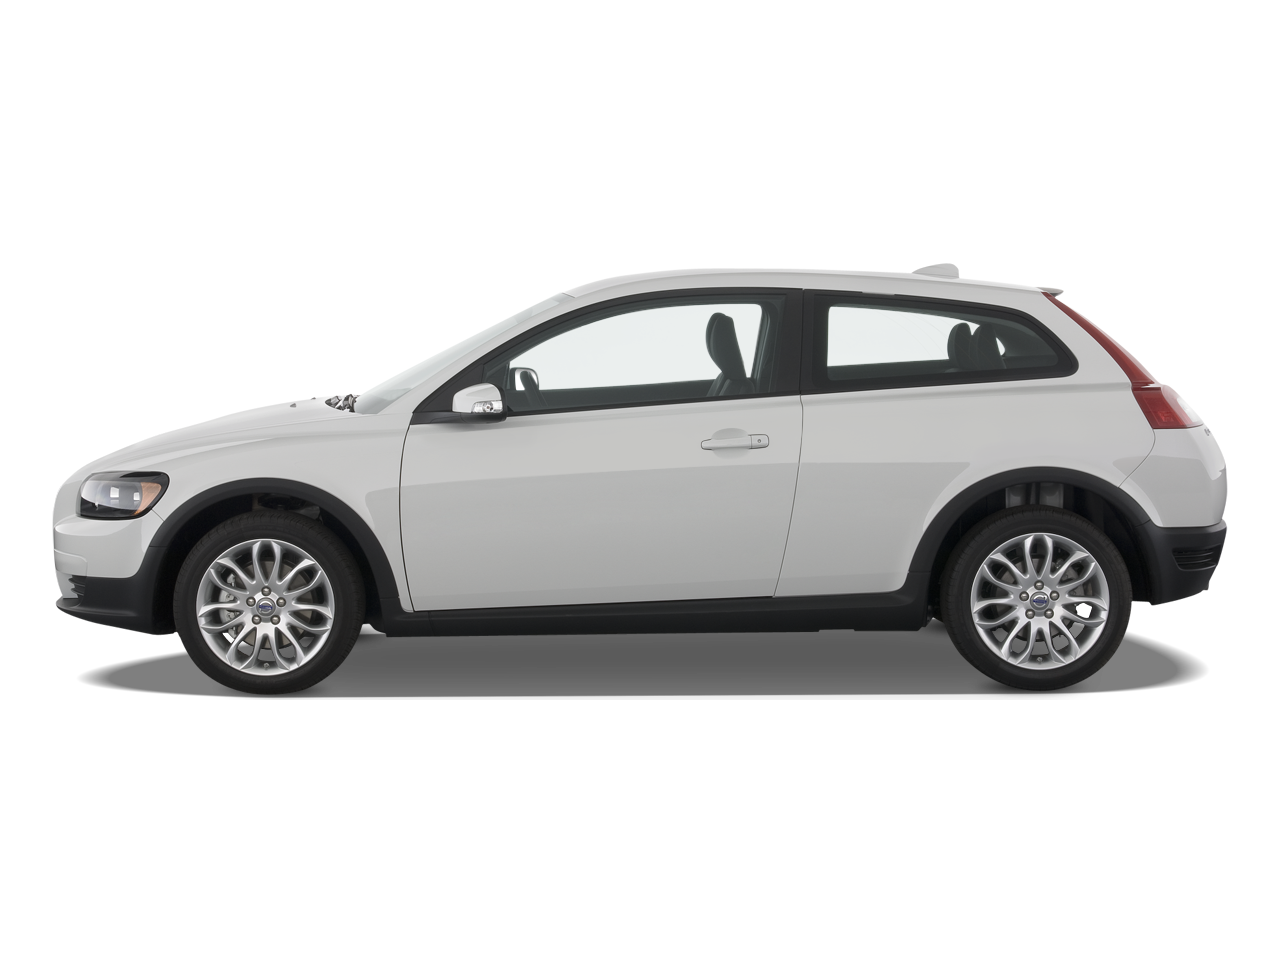 2009 volvo c30 t5 review